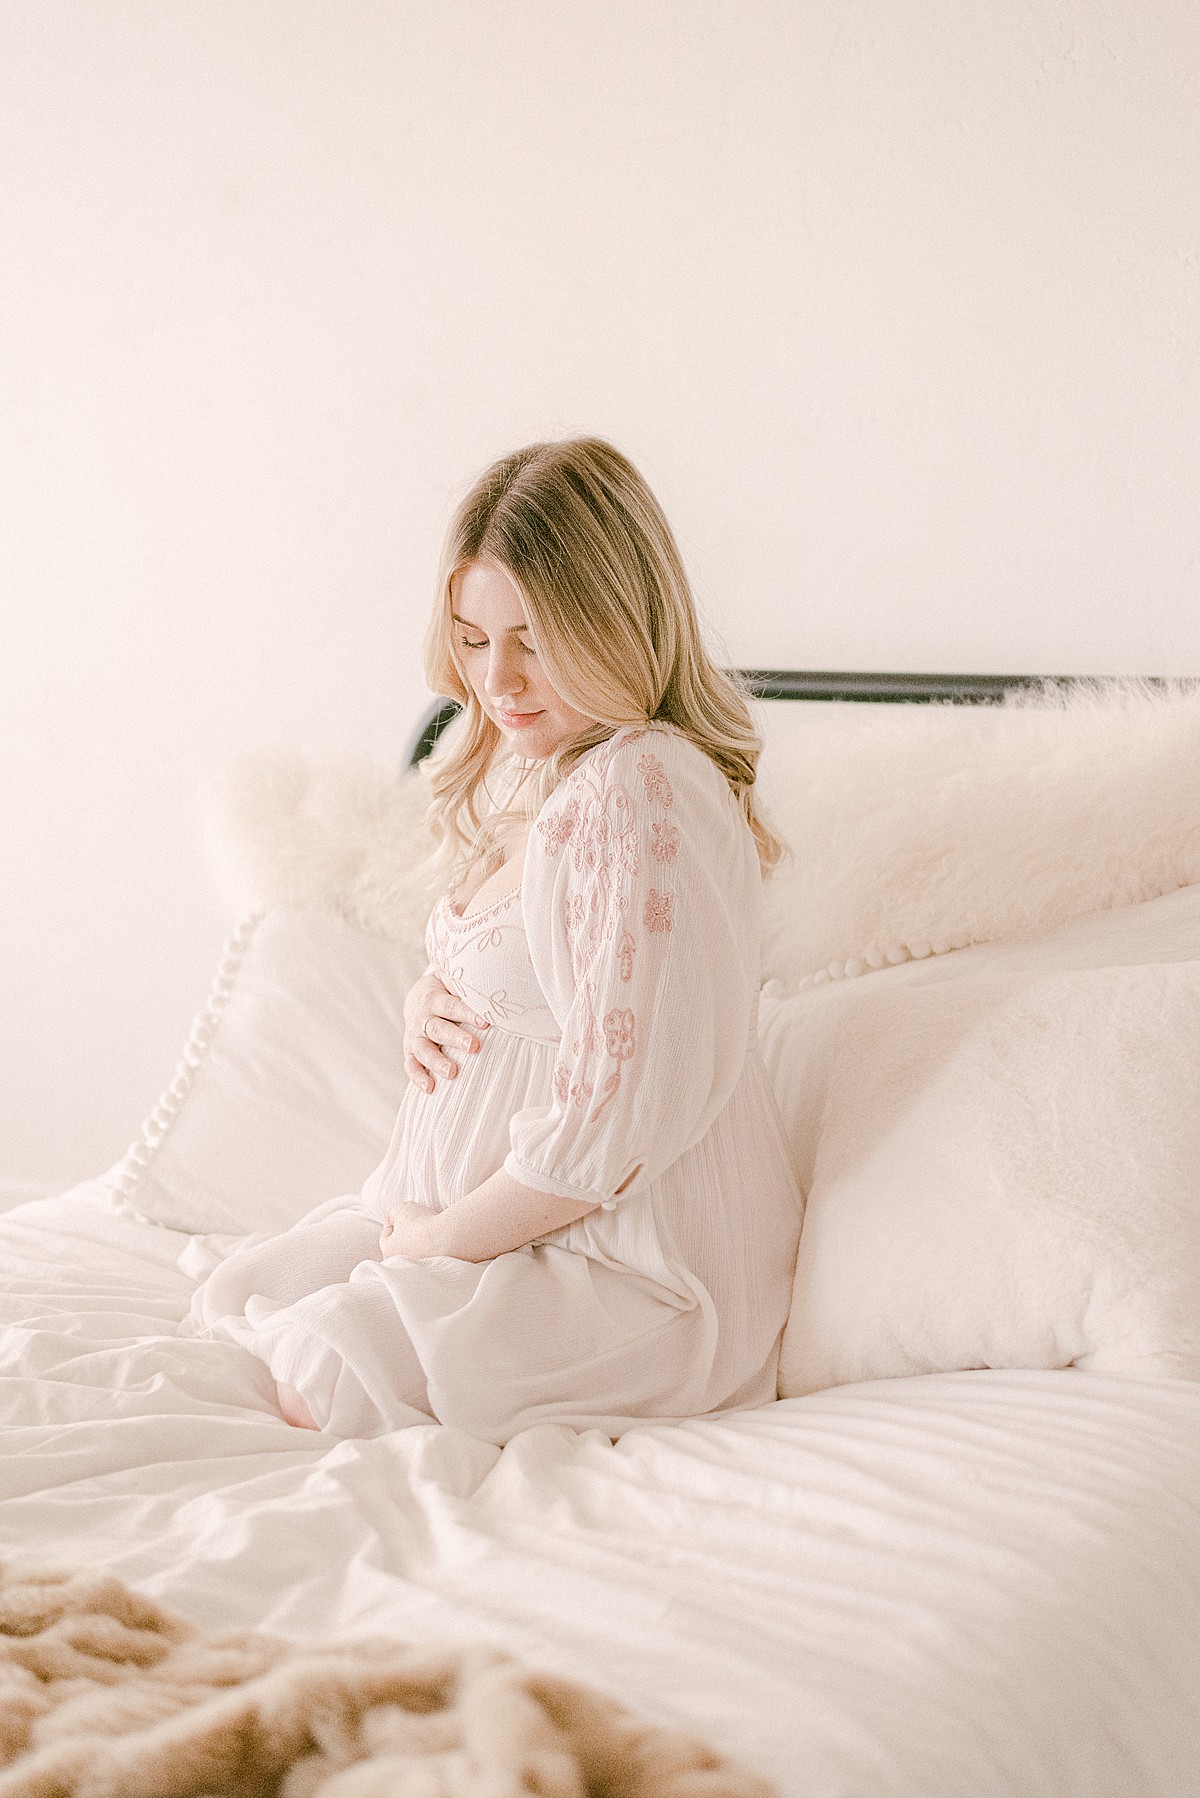 Expecting mom in white flowy dress posing for maternity photos on neutral decor bedding.